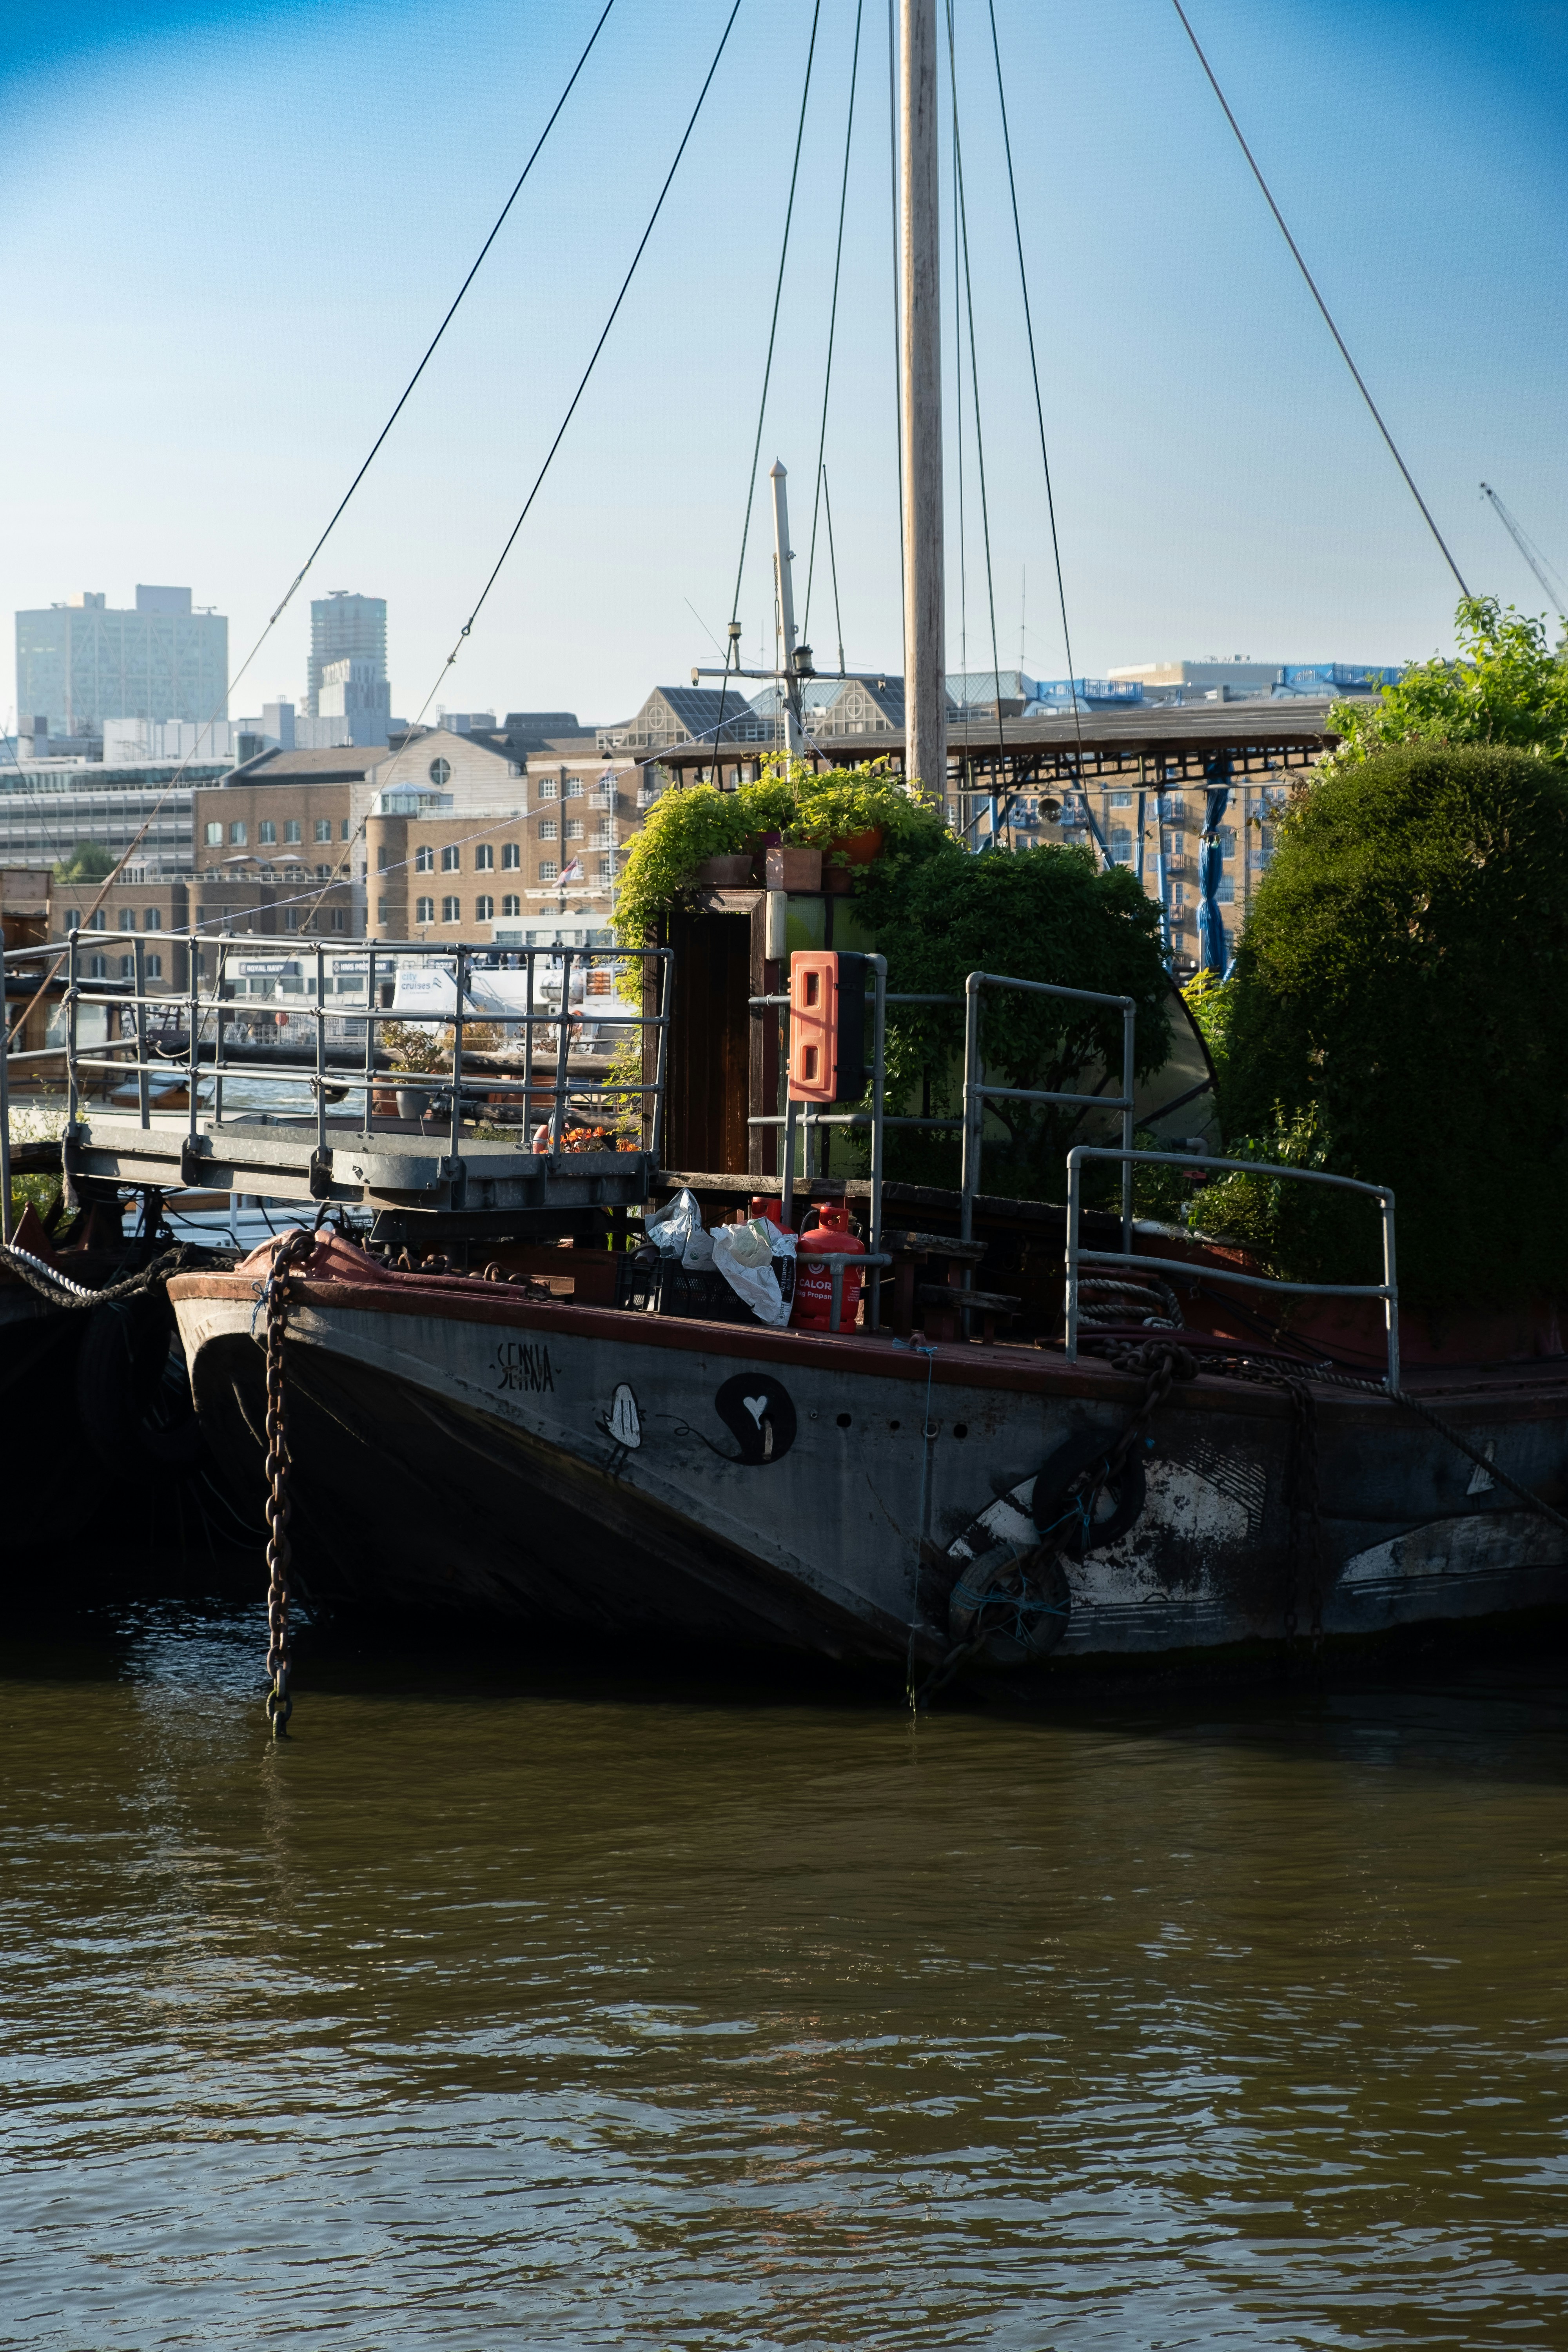 Boats (barges) with a garden moored on the pier of the River Thames one summer golden hour. Taken near the Tower Bridge, in London. In the background buildings of the Wapping neighbourhood.